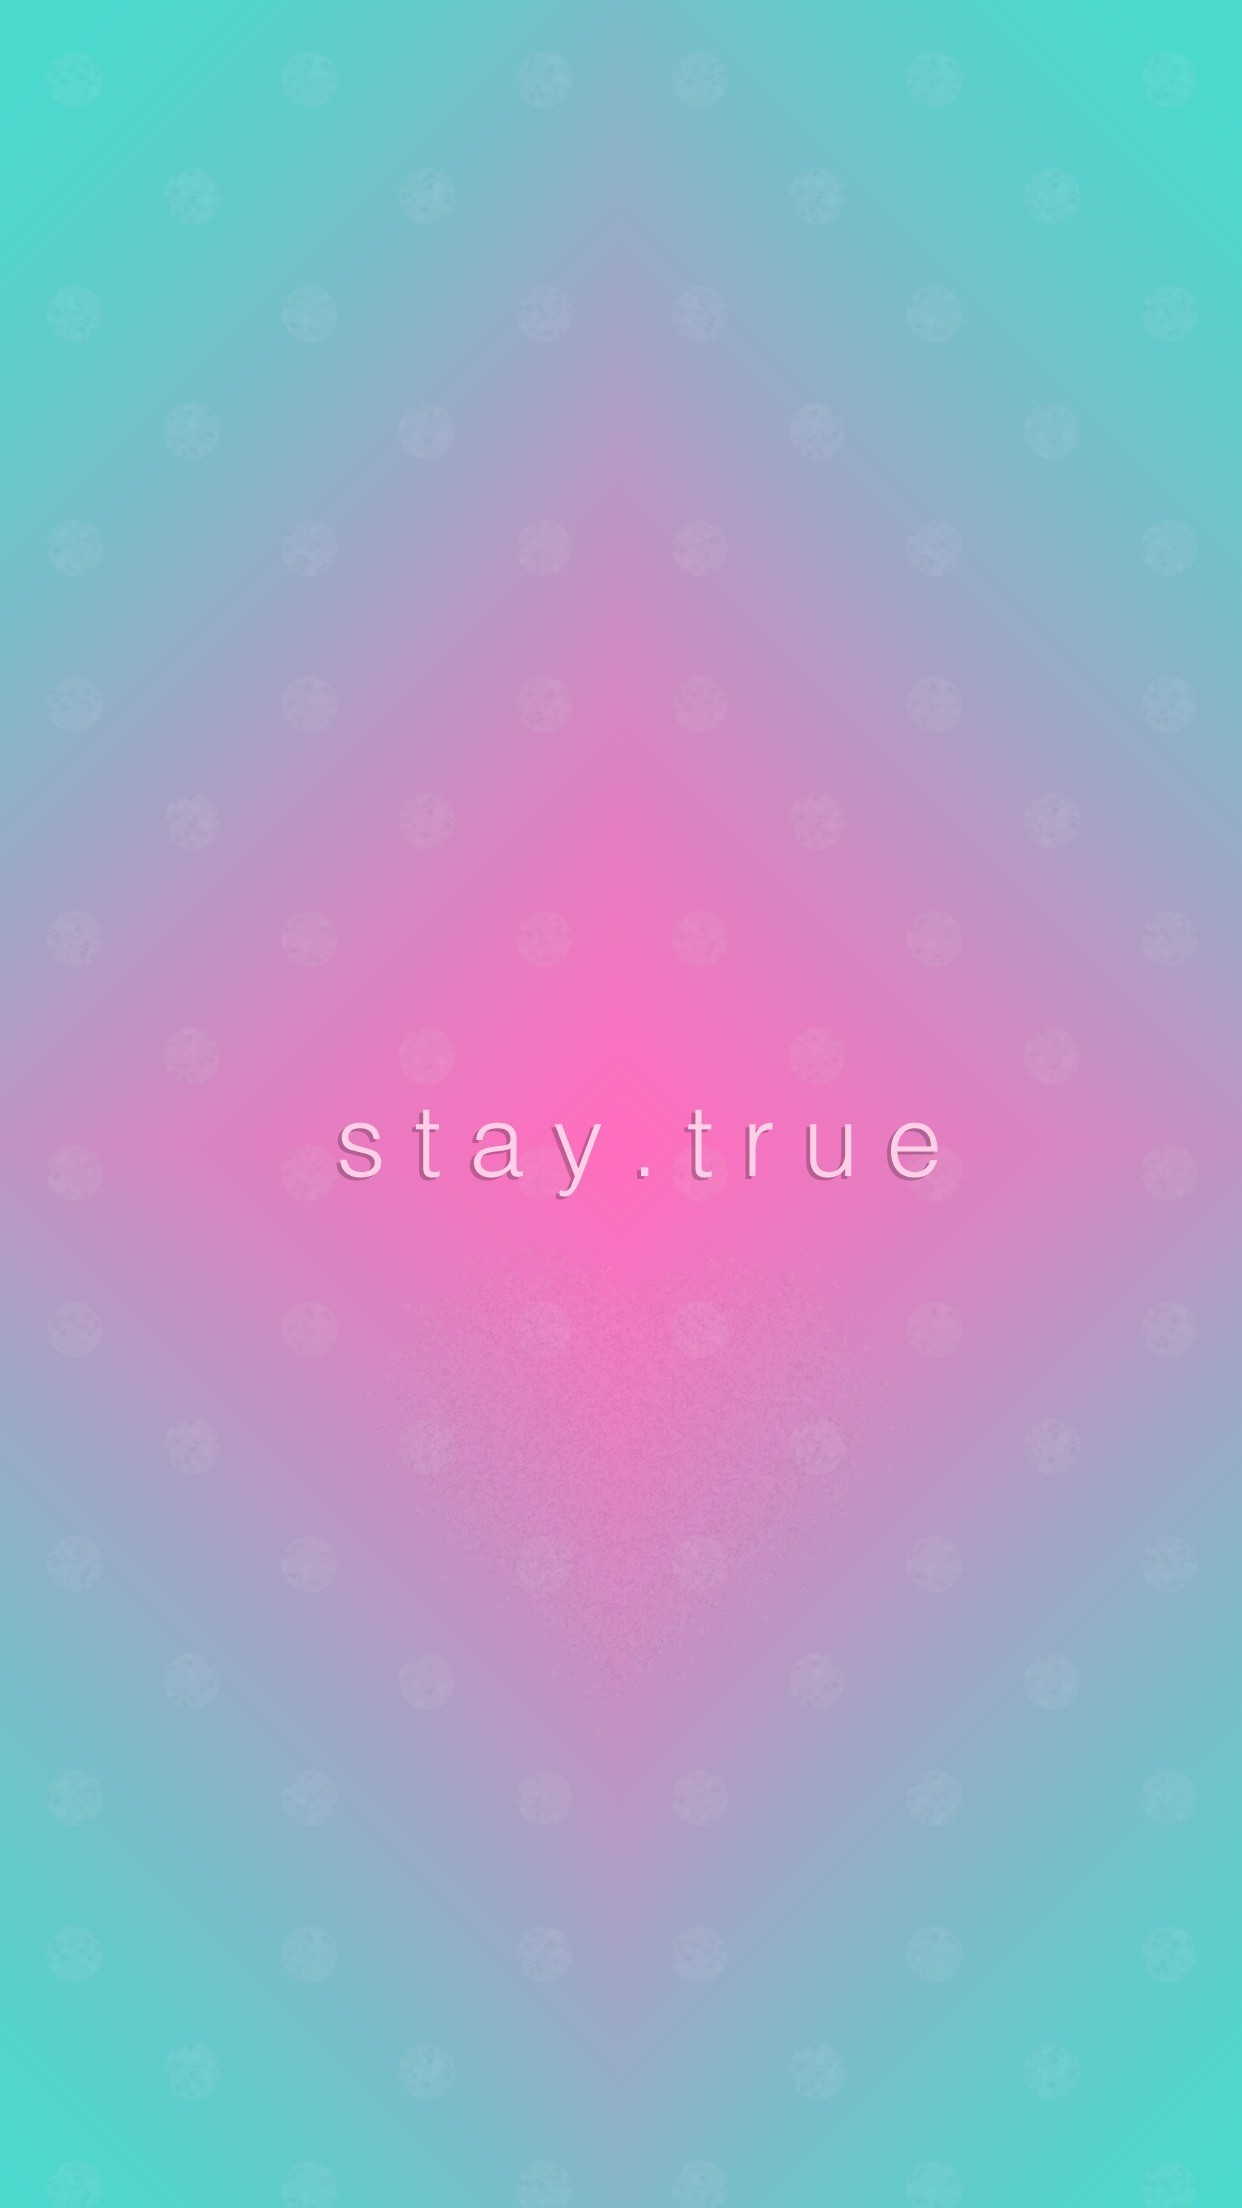 1242x2208 Wallpaper, background, iPhone, Android, HD, pink, blue, green,